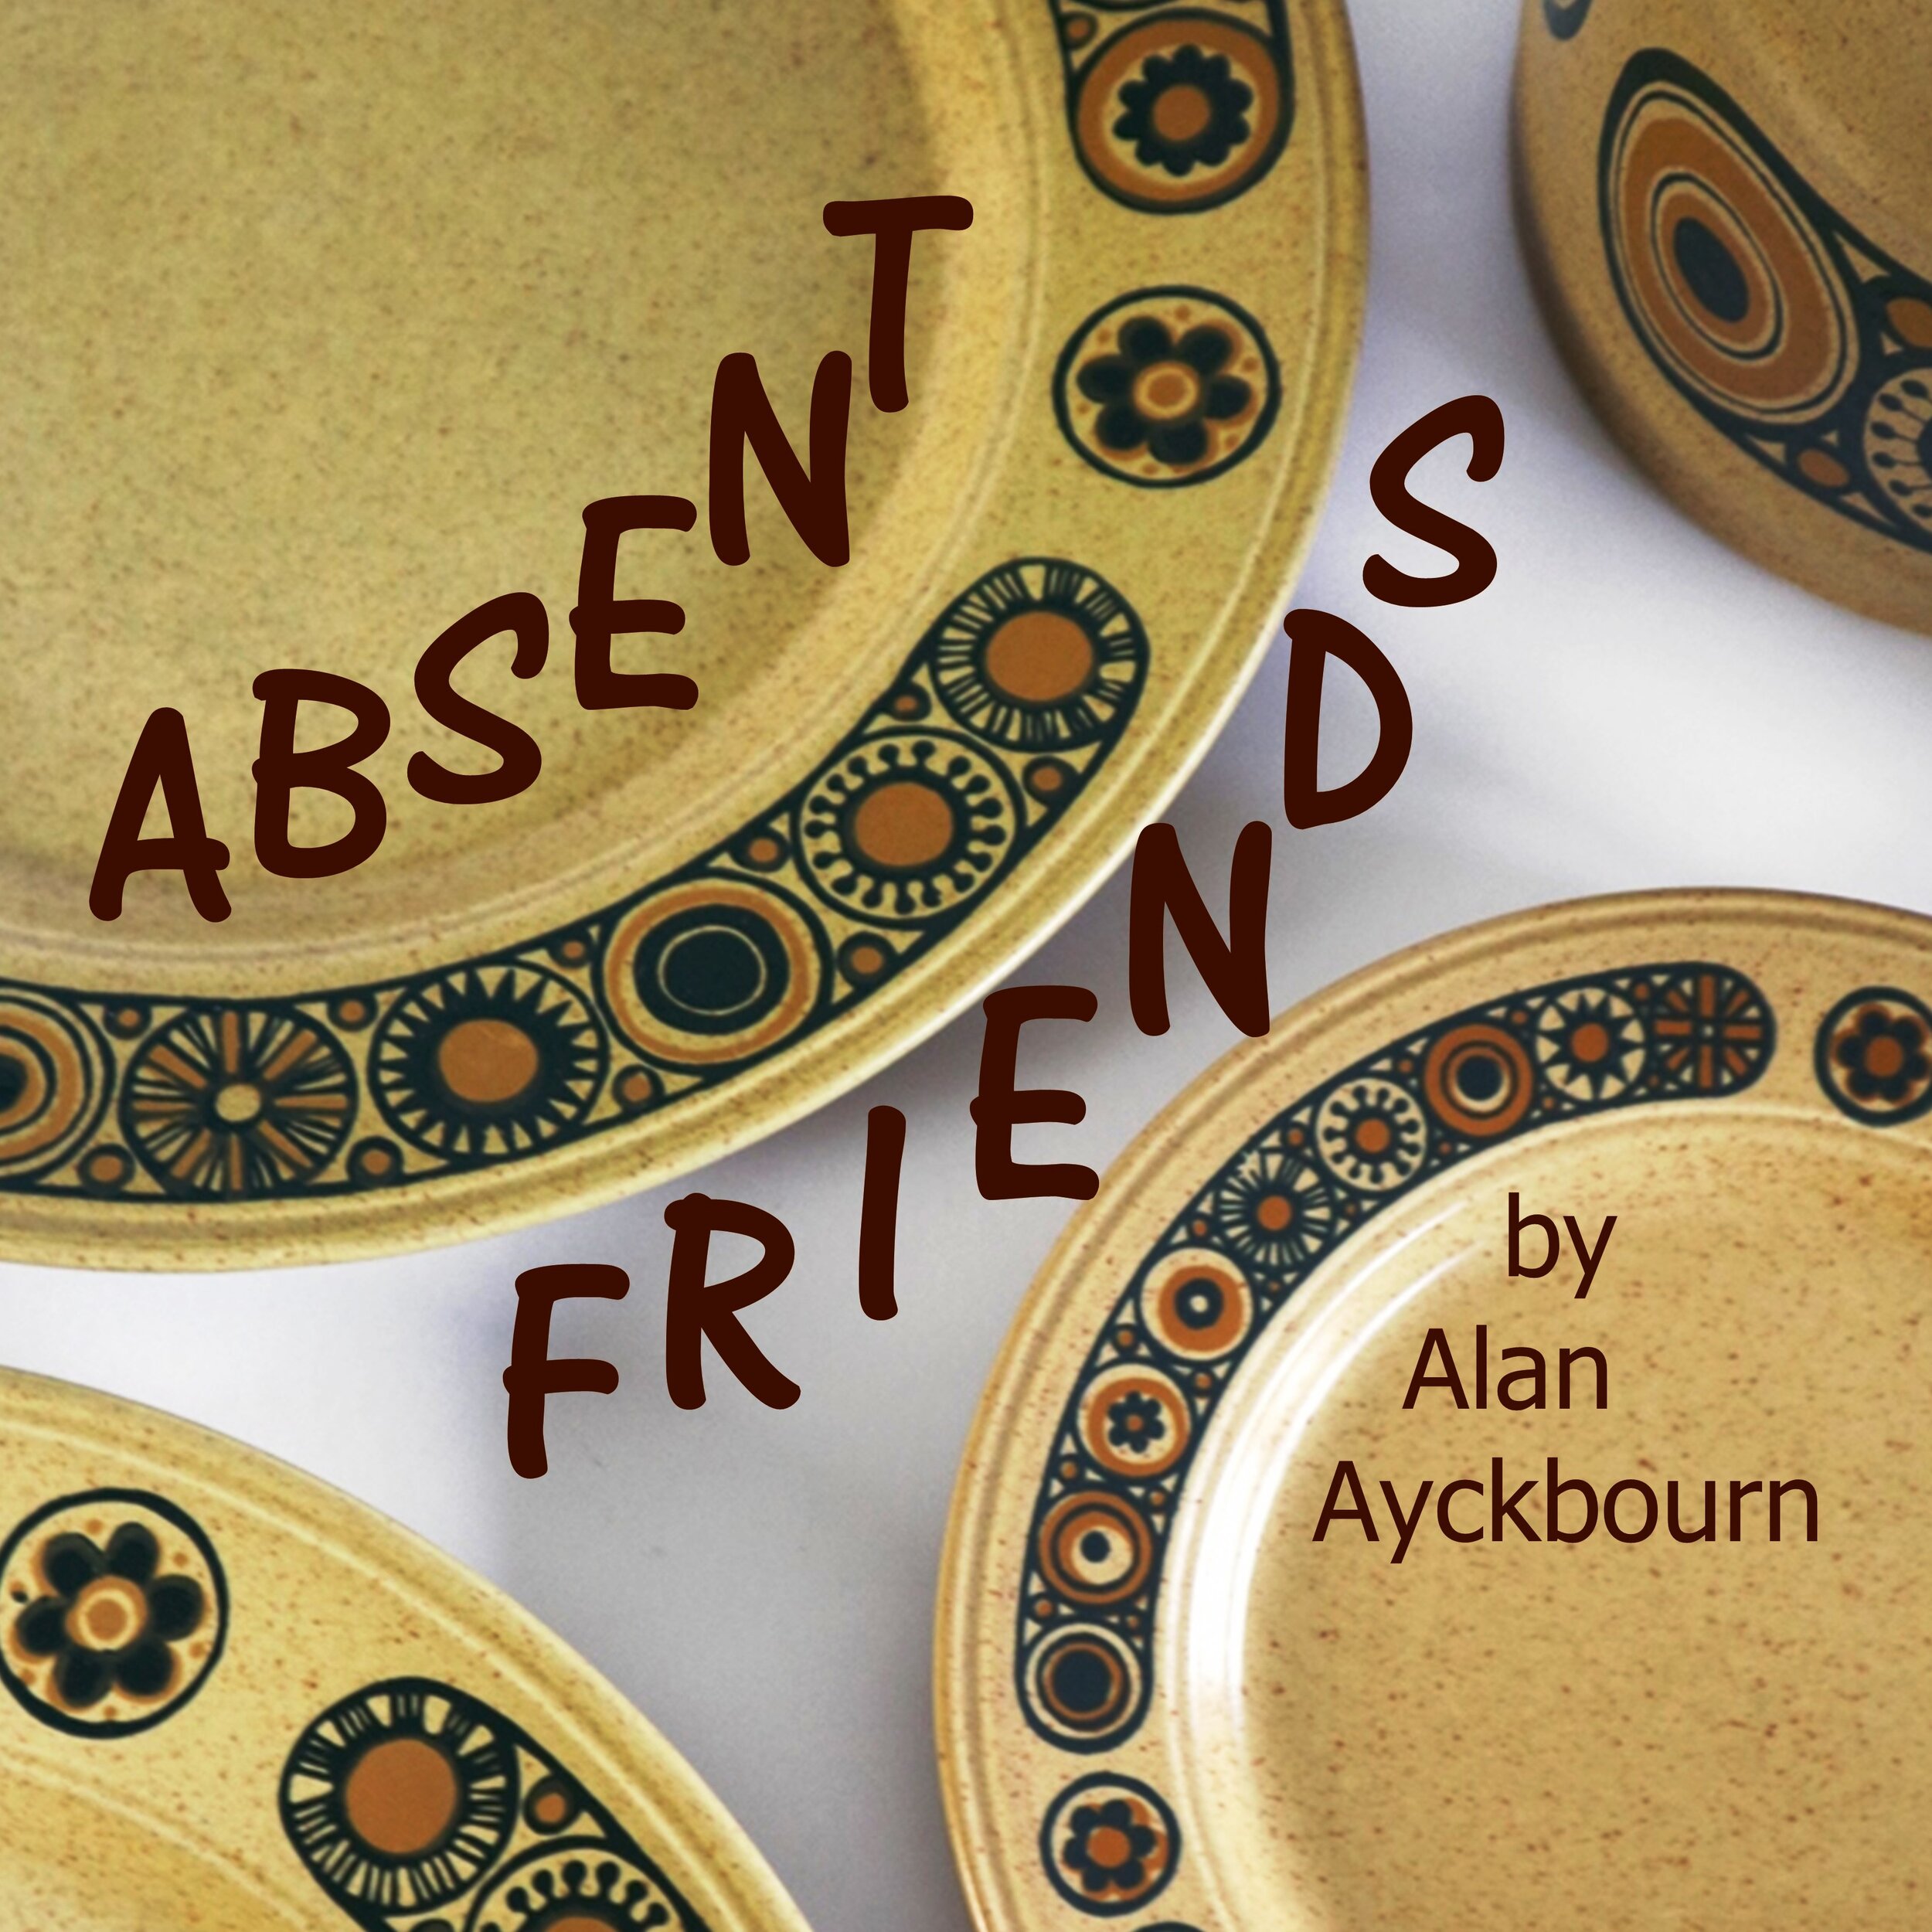 Absent Friends - Audition Date Sunday 15th August 2021, 4pm